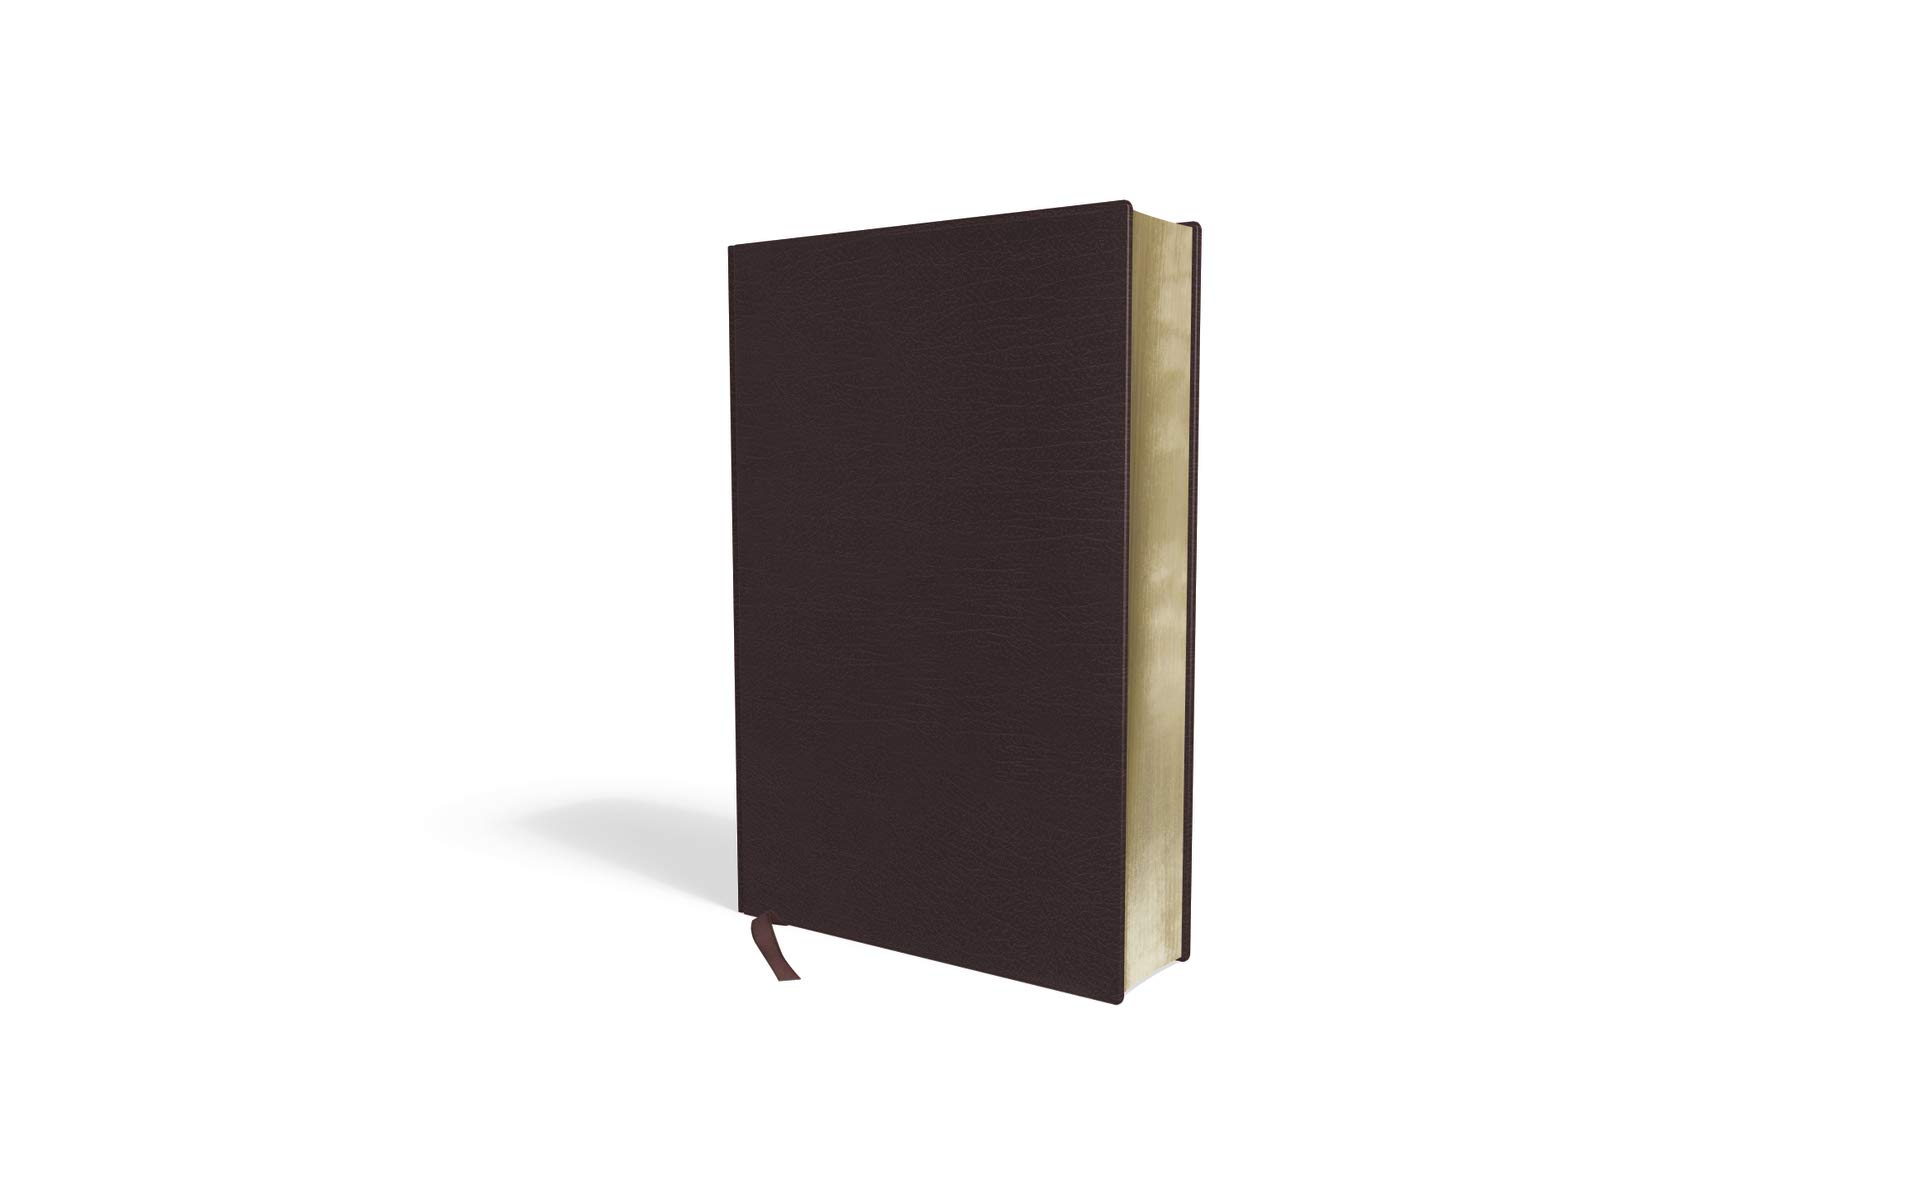 Amplified Holy Bible, Large Print, Bonded Leather, Burgundy: Captures the Full Meaning Behind the Original Greek and Hebrew